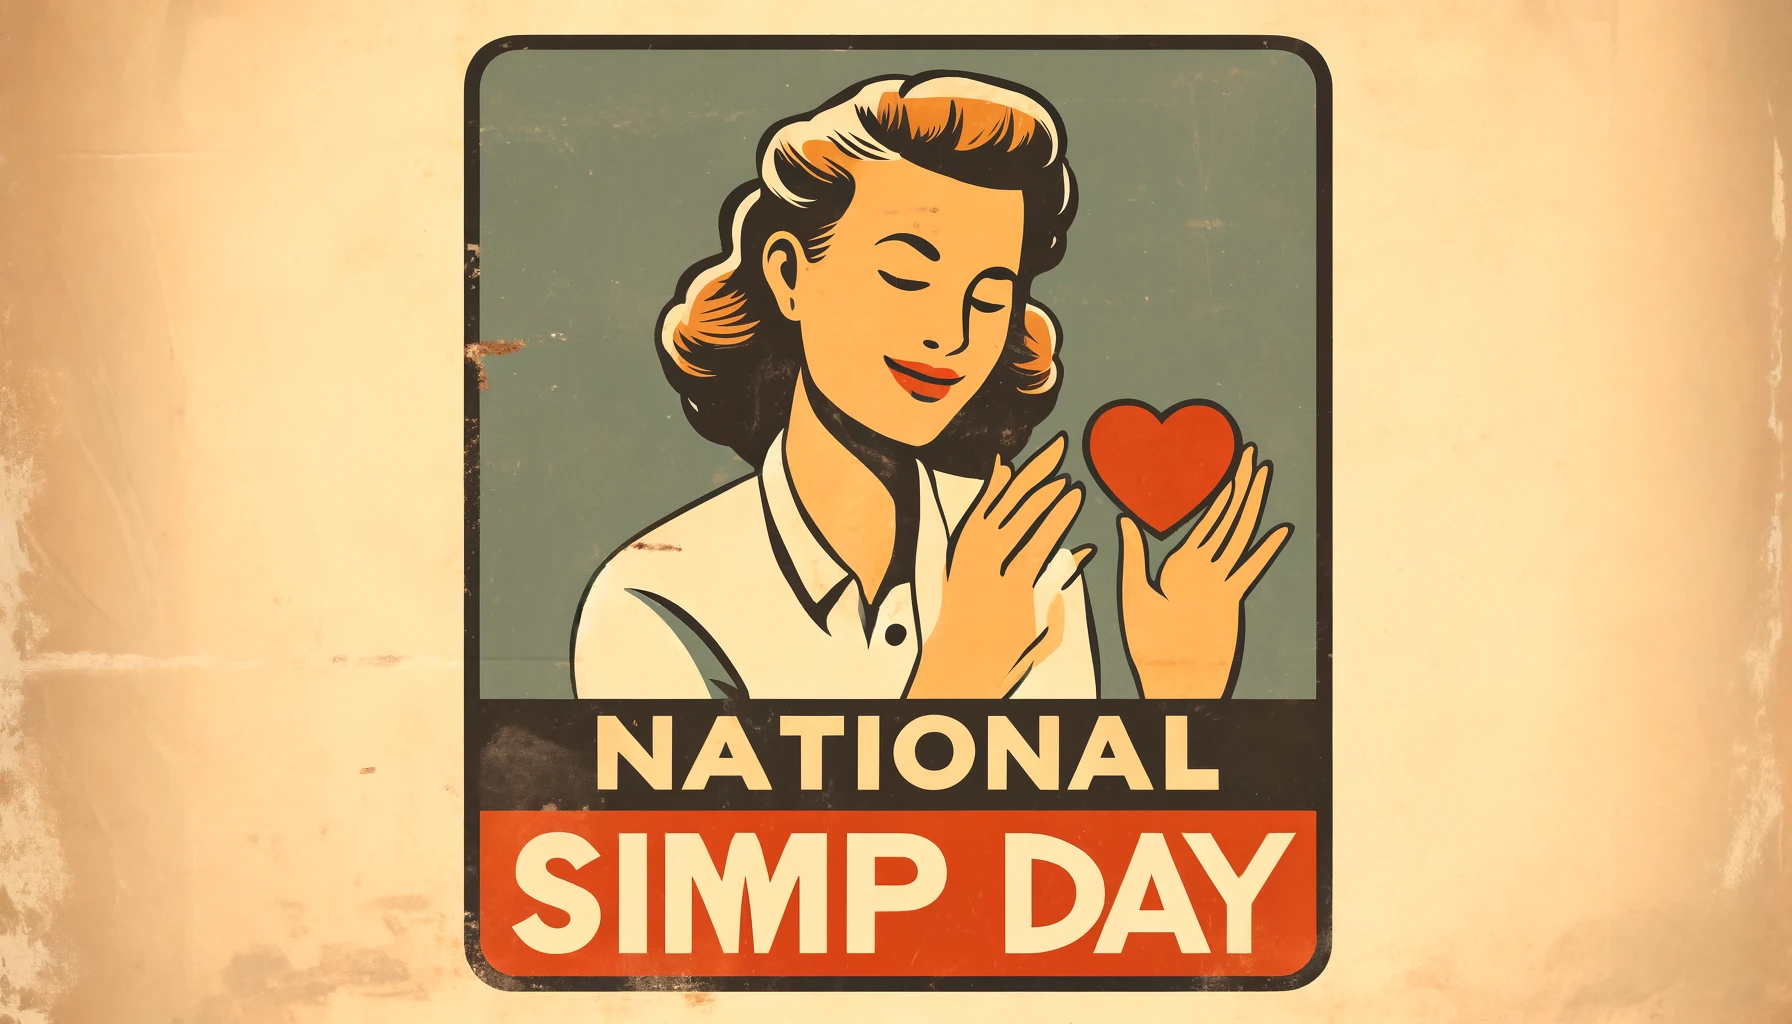 National Simp Day